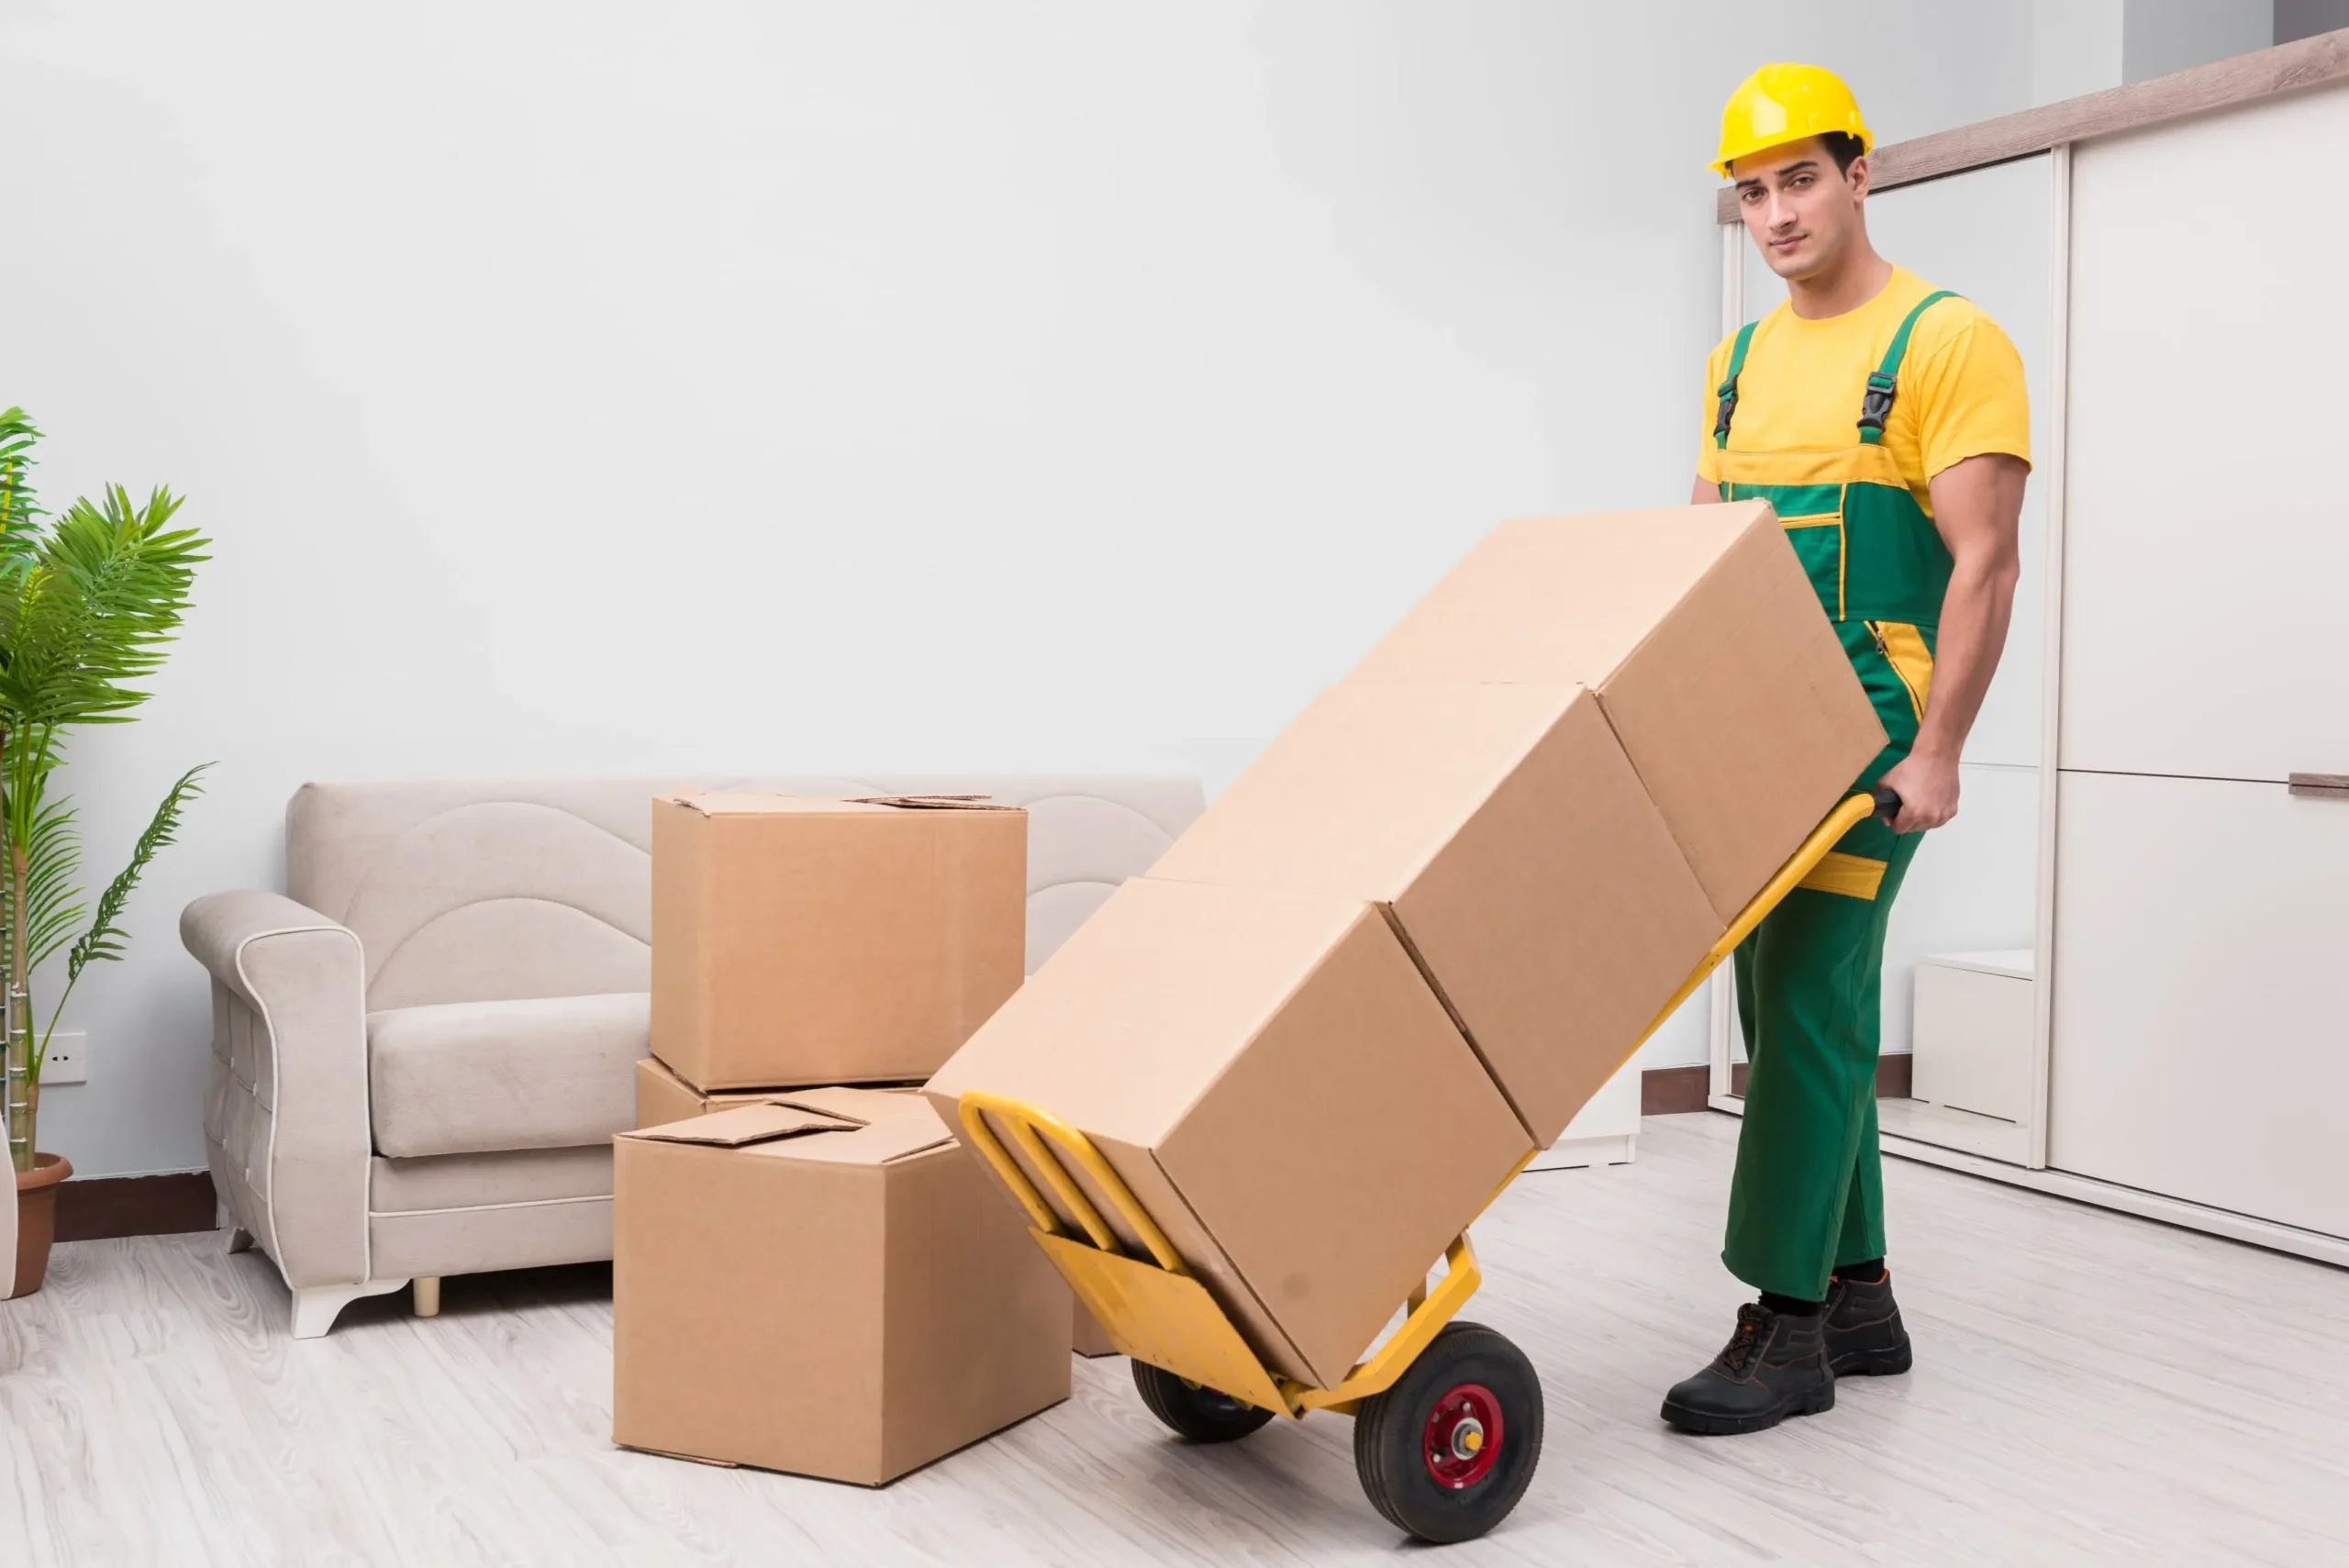 Relocating Your Business in Lane Cove? Let Us Handle the Heavy Lifting